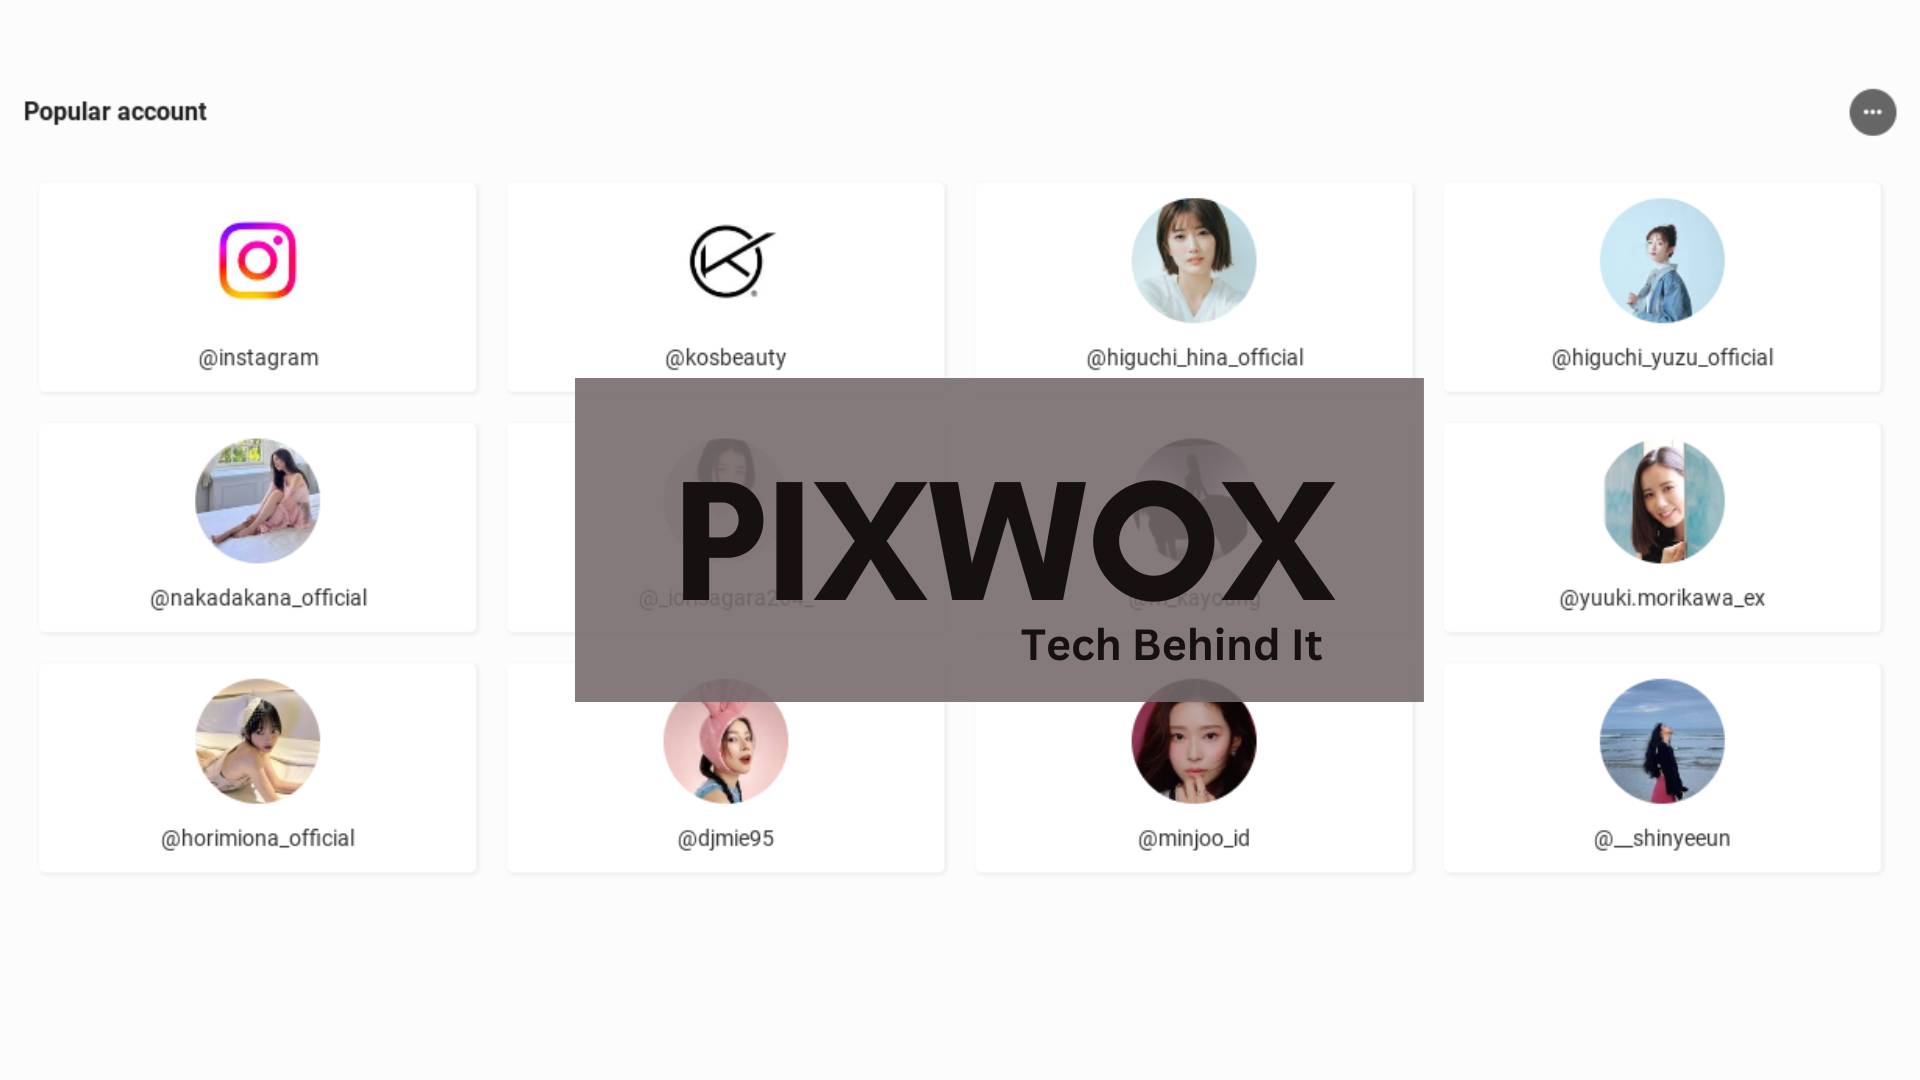 Pixwox: A Tool for Accessing Instagram Content